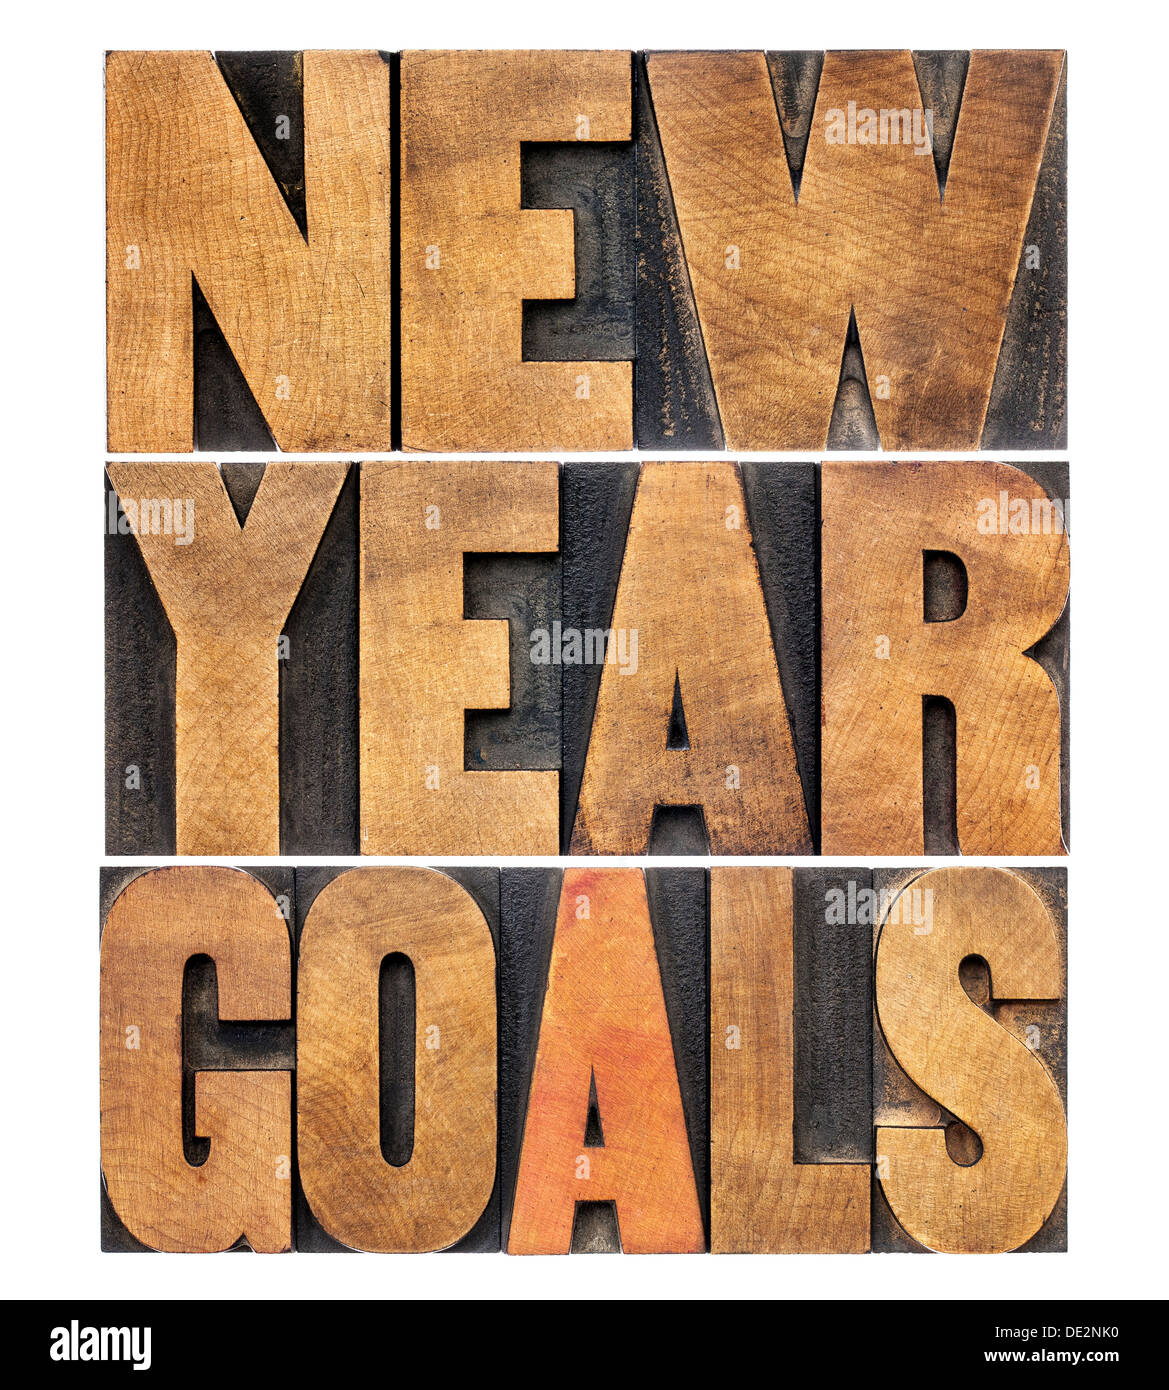 New Year goals - resolution concept - isolated text in letterpress wood type Stock Photo